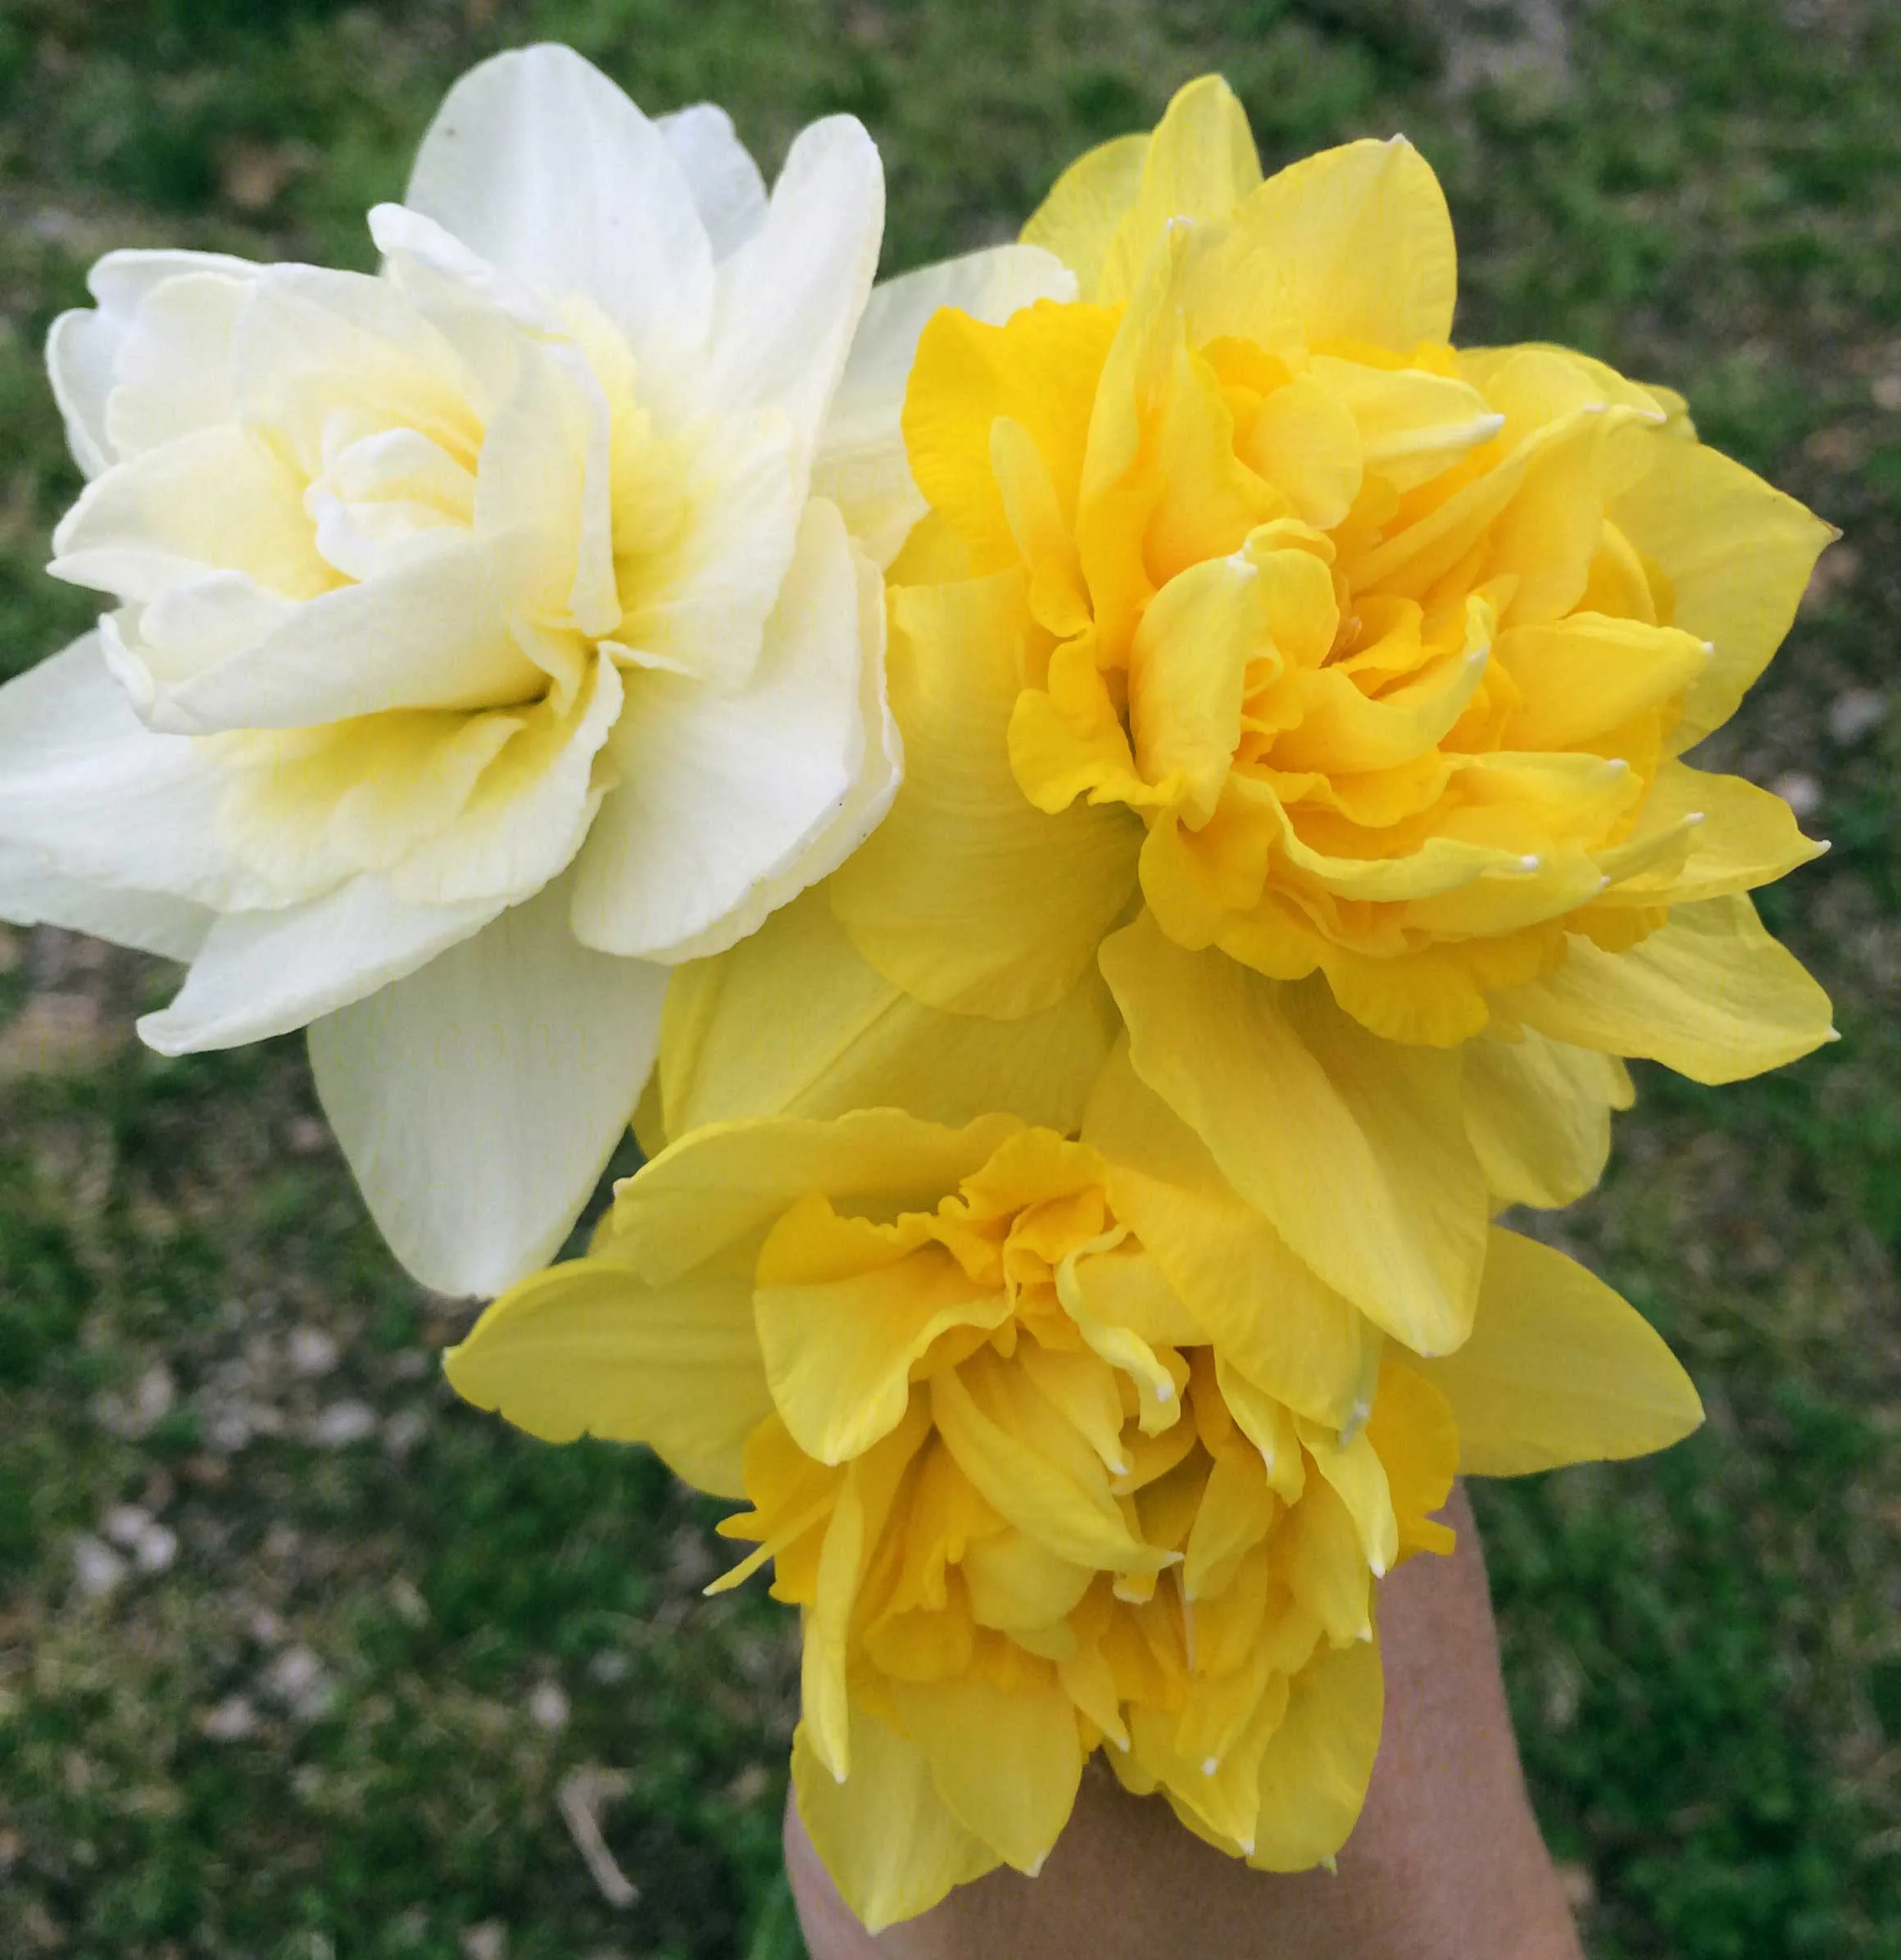 Double Daffodils; Rose of May (white) and Dick Wilden (yellow) varieties. 